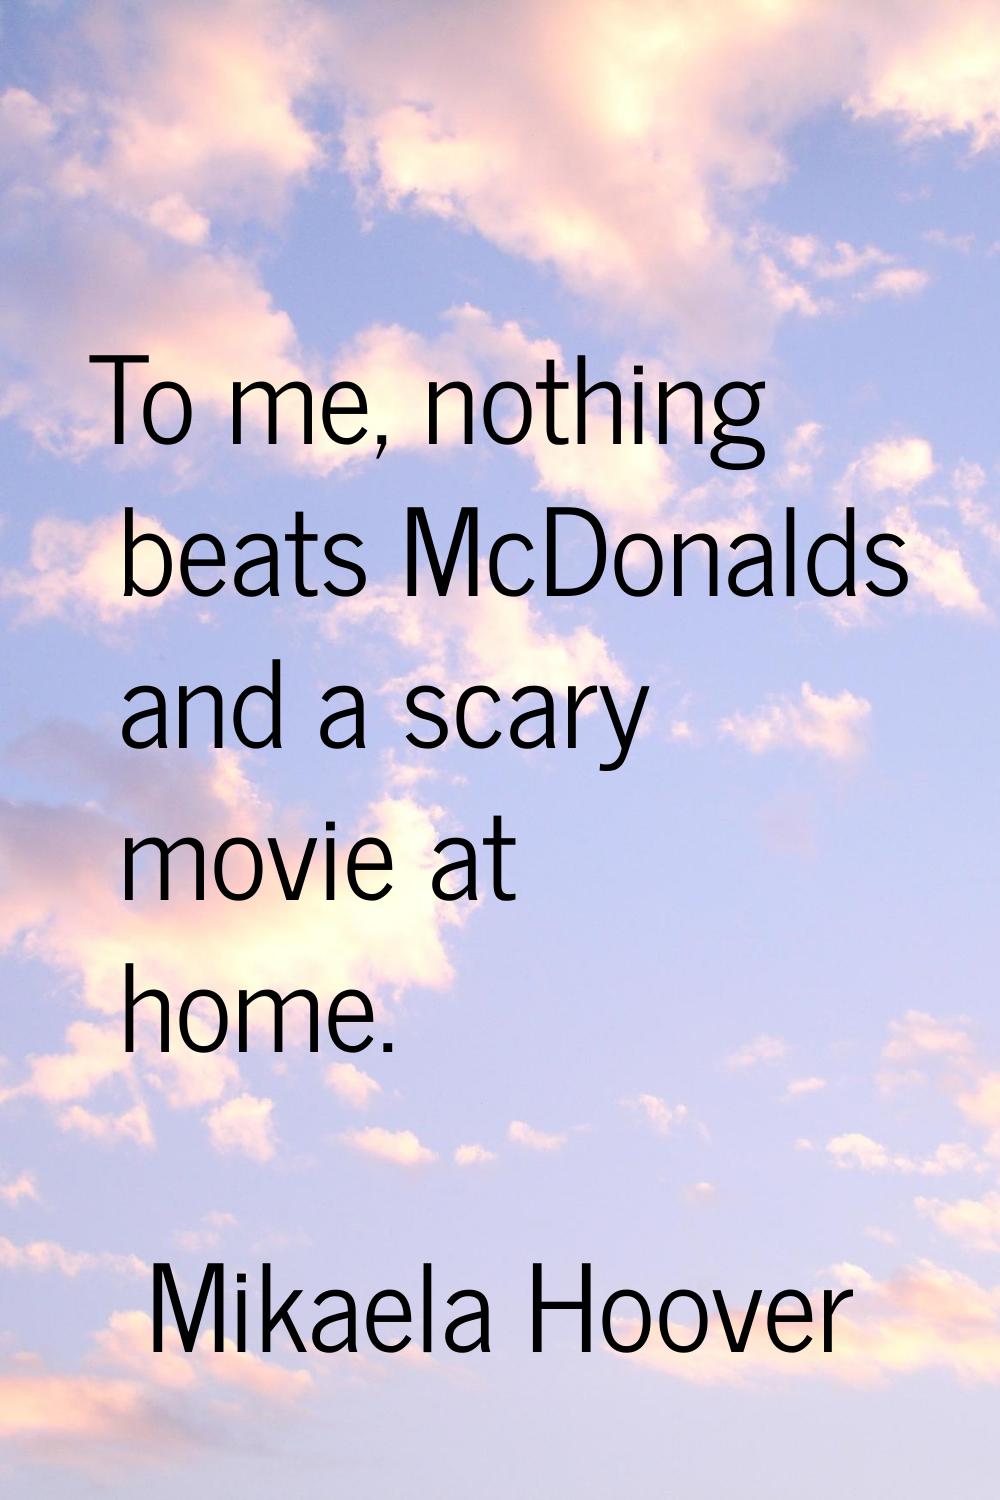 To me, nothing beats McDonalds and a scary movie at home.